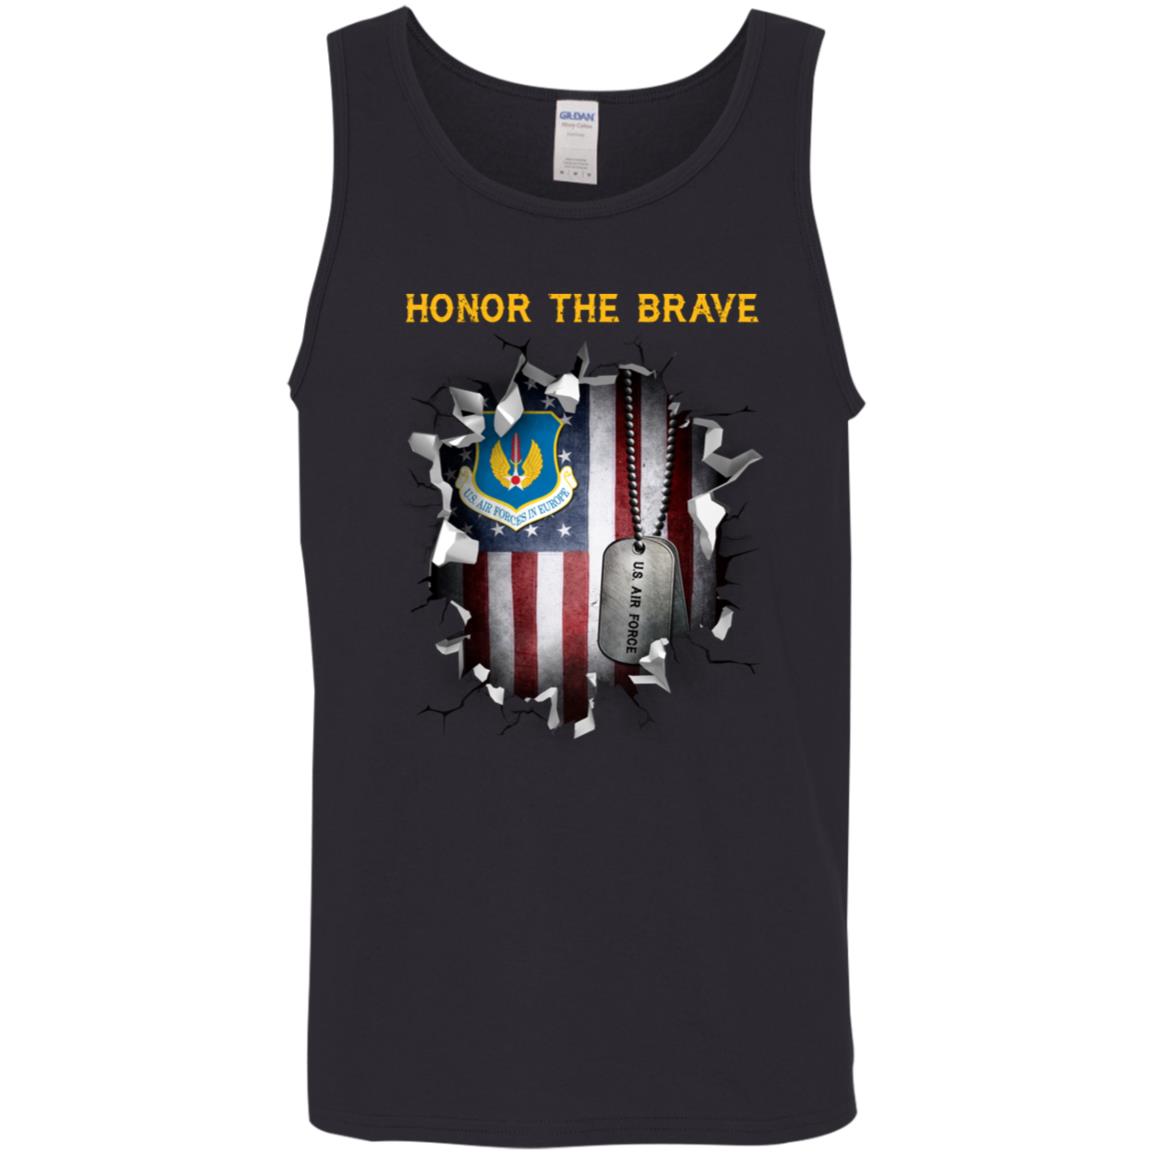 US Air Force in Europe - Honor The Brave Front Shirt